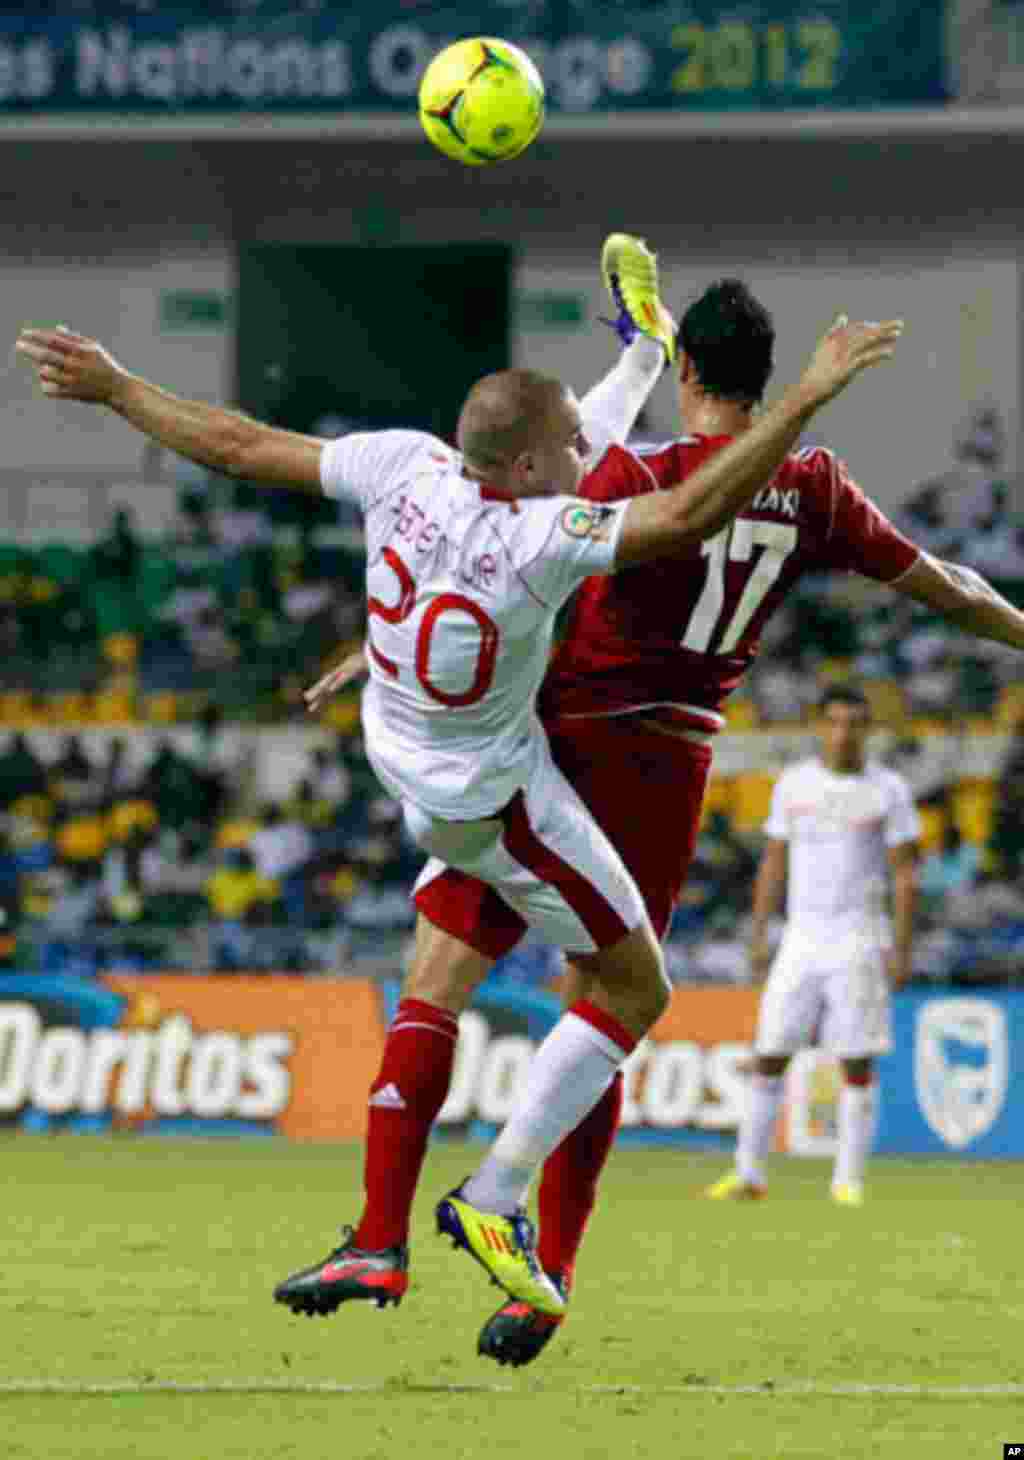 Tunisia's Aymen jumps for the ball with Morocco's Marouane during their African Cup of Nations soccer match in Libreville